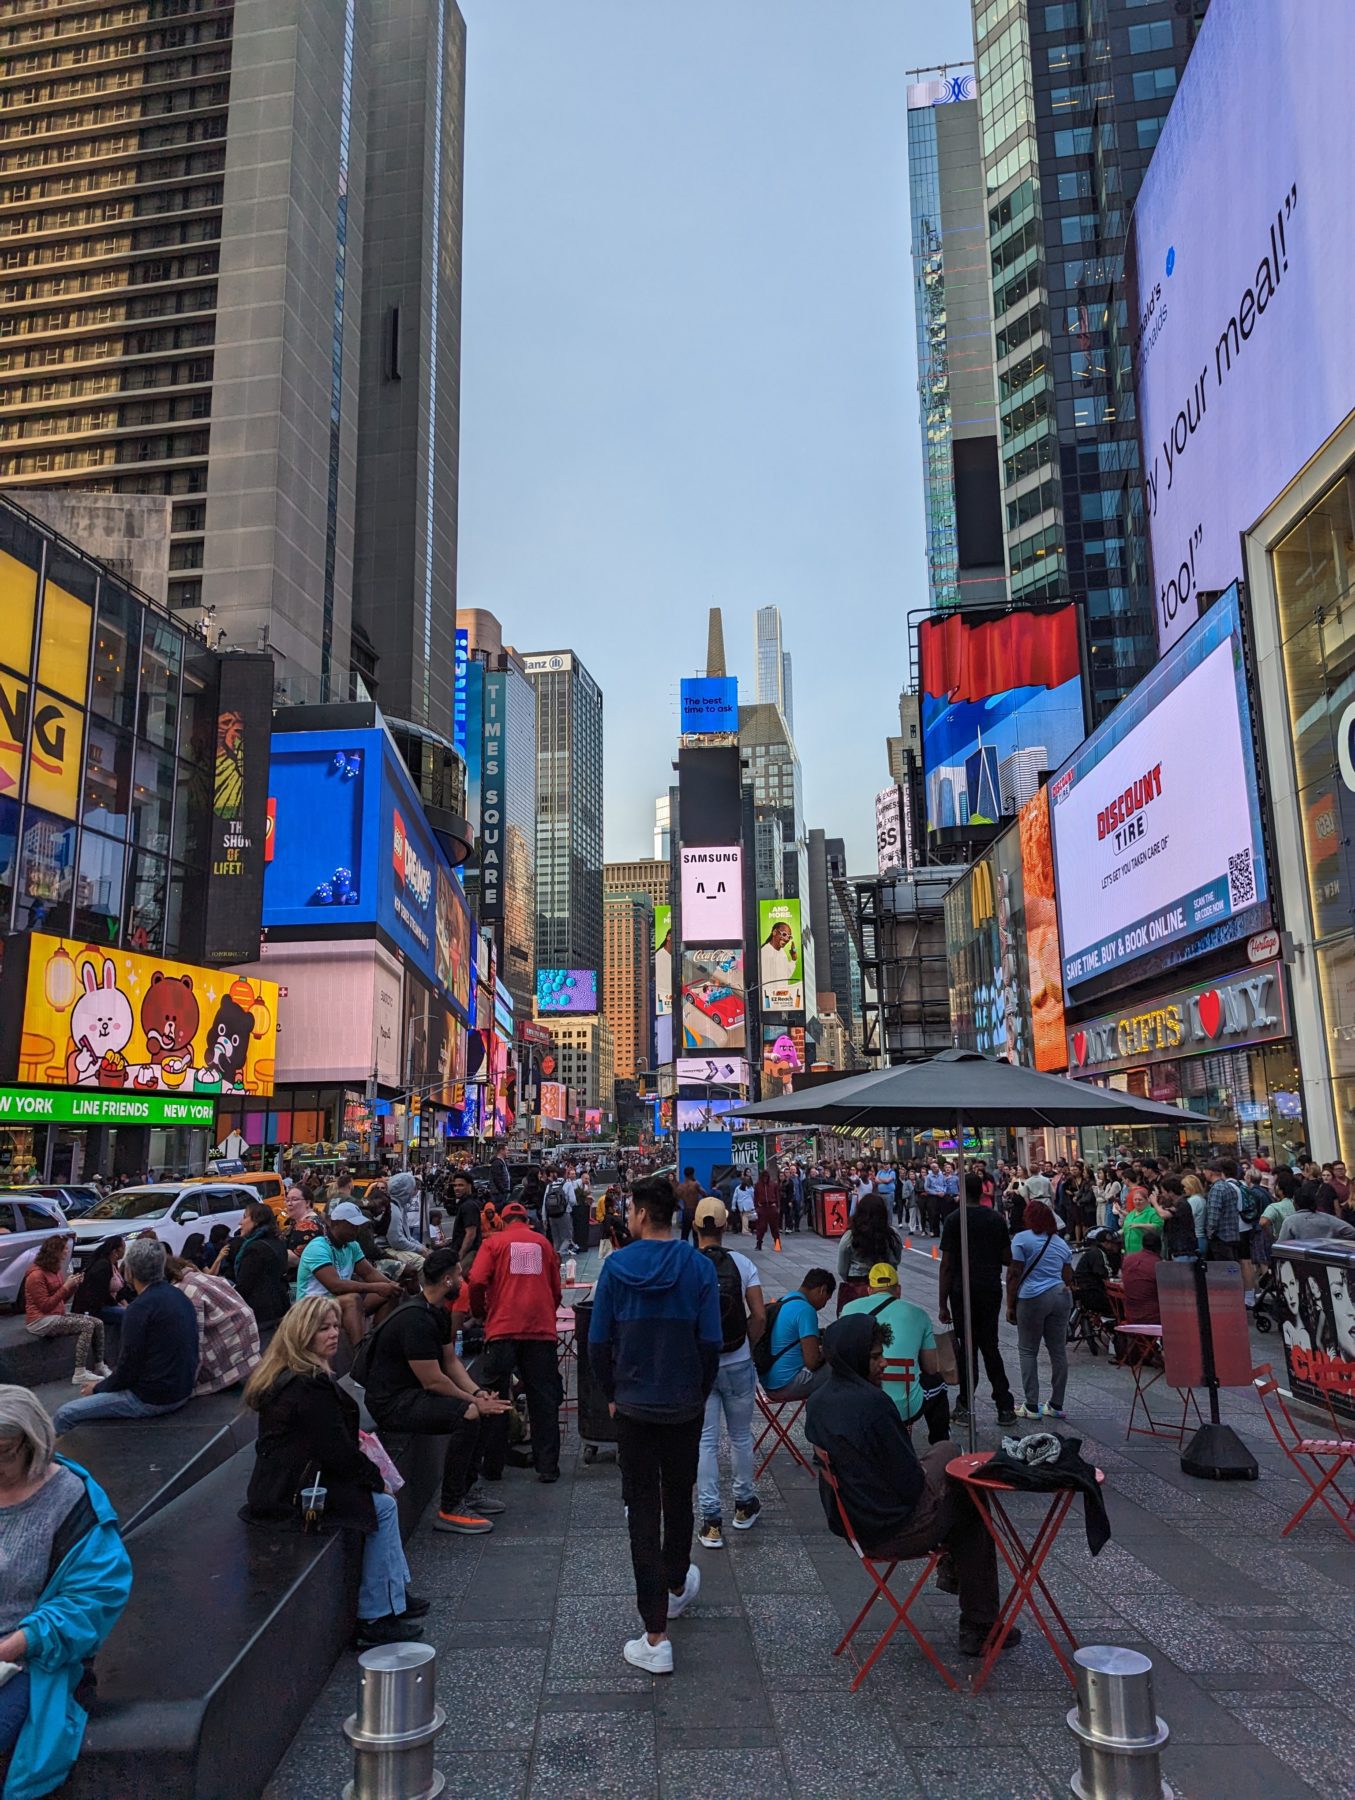 Things to do in TImes Square New York